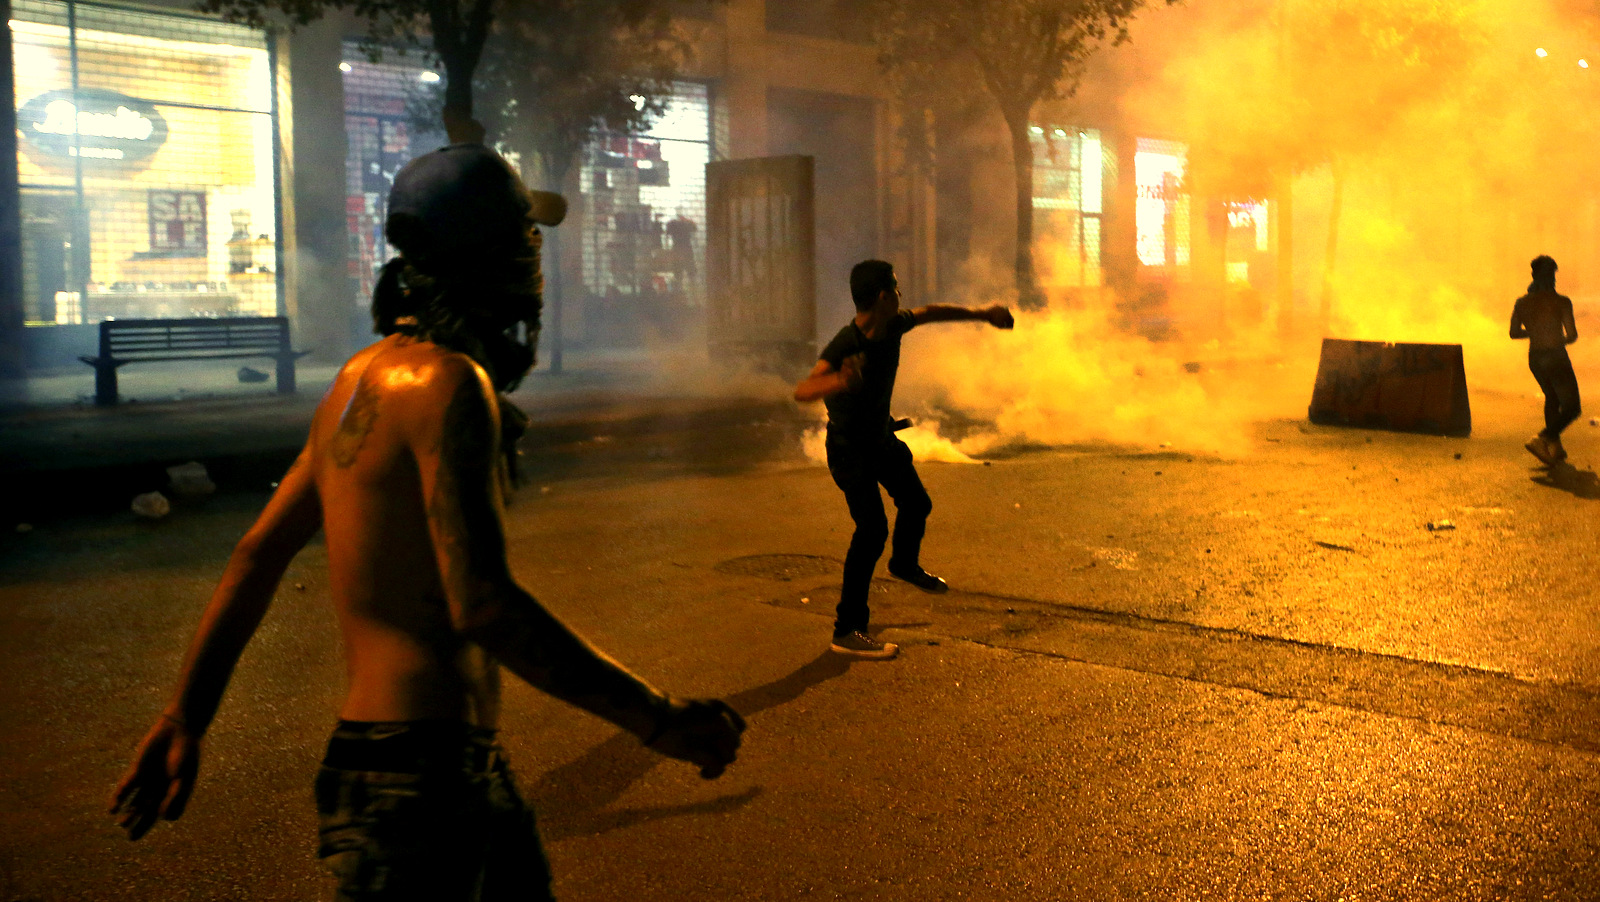 Lebanese anti-government protesters throw stones against the riot policemen, not seen, as smoke rise from the tear gas canisters, during a protest against an ongoing trash crisis, in downtown Beirut, Lebanon, late Sunday, Aug. 23, 2015. Lebanese riot police battled in the streets of downtown Beirut for a second night Sunday after demonstrators rallied over government corruption and an ongoing trash crisis. (AP Photo/Hussein Malla)